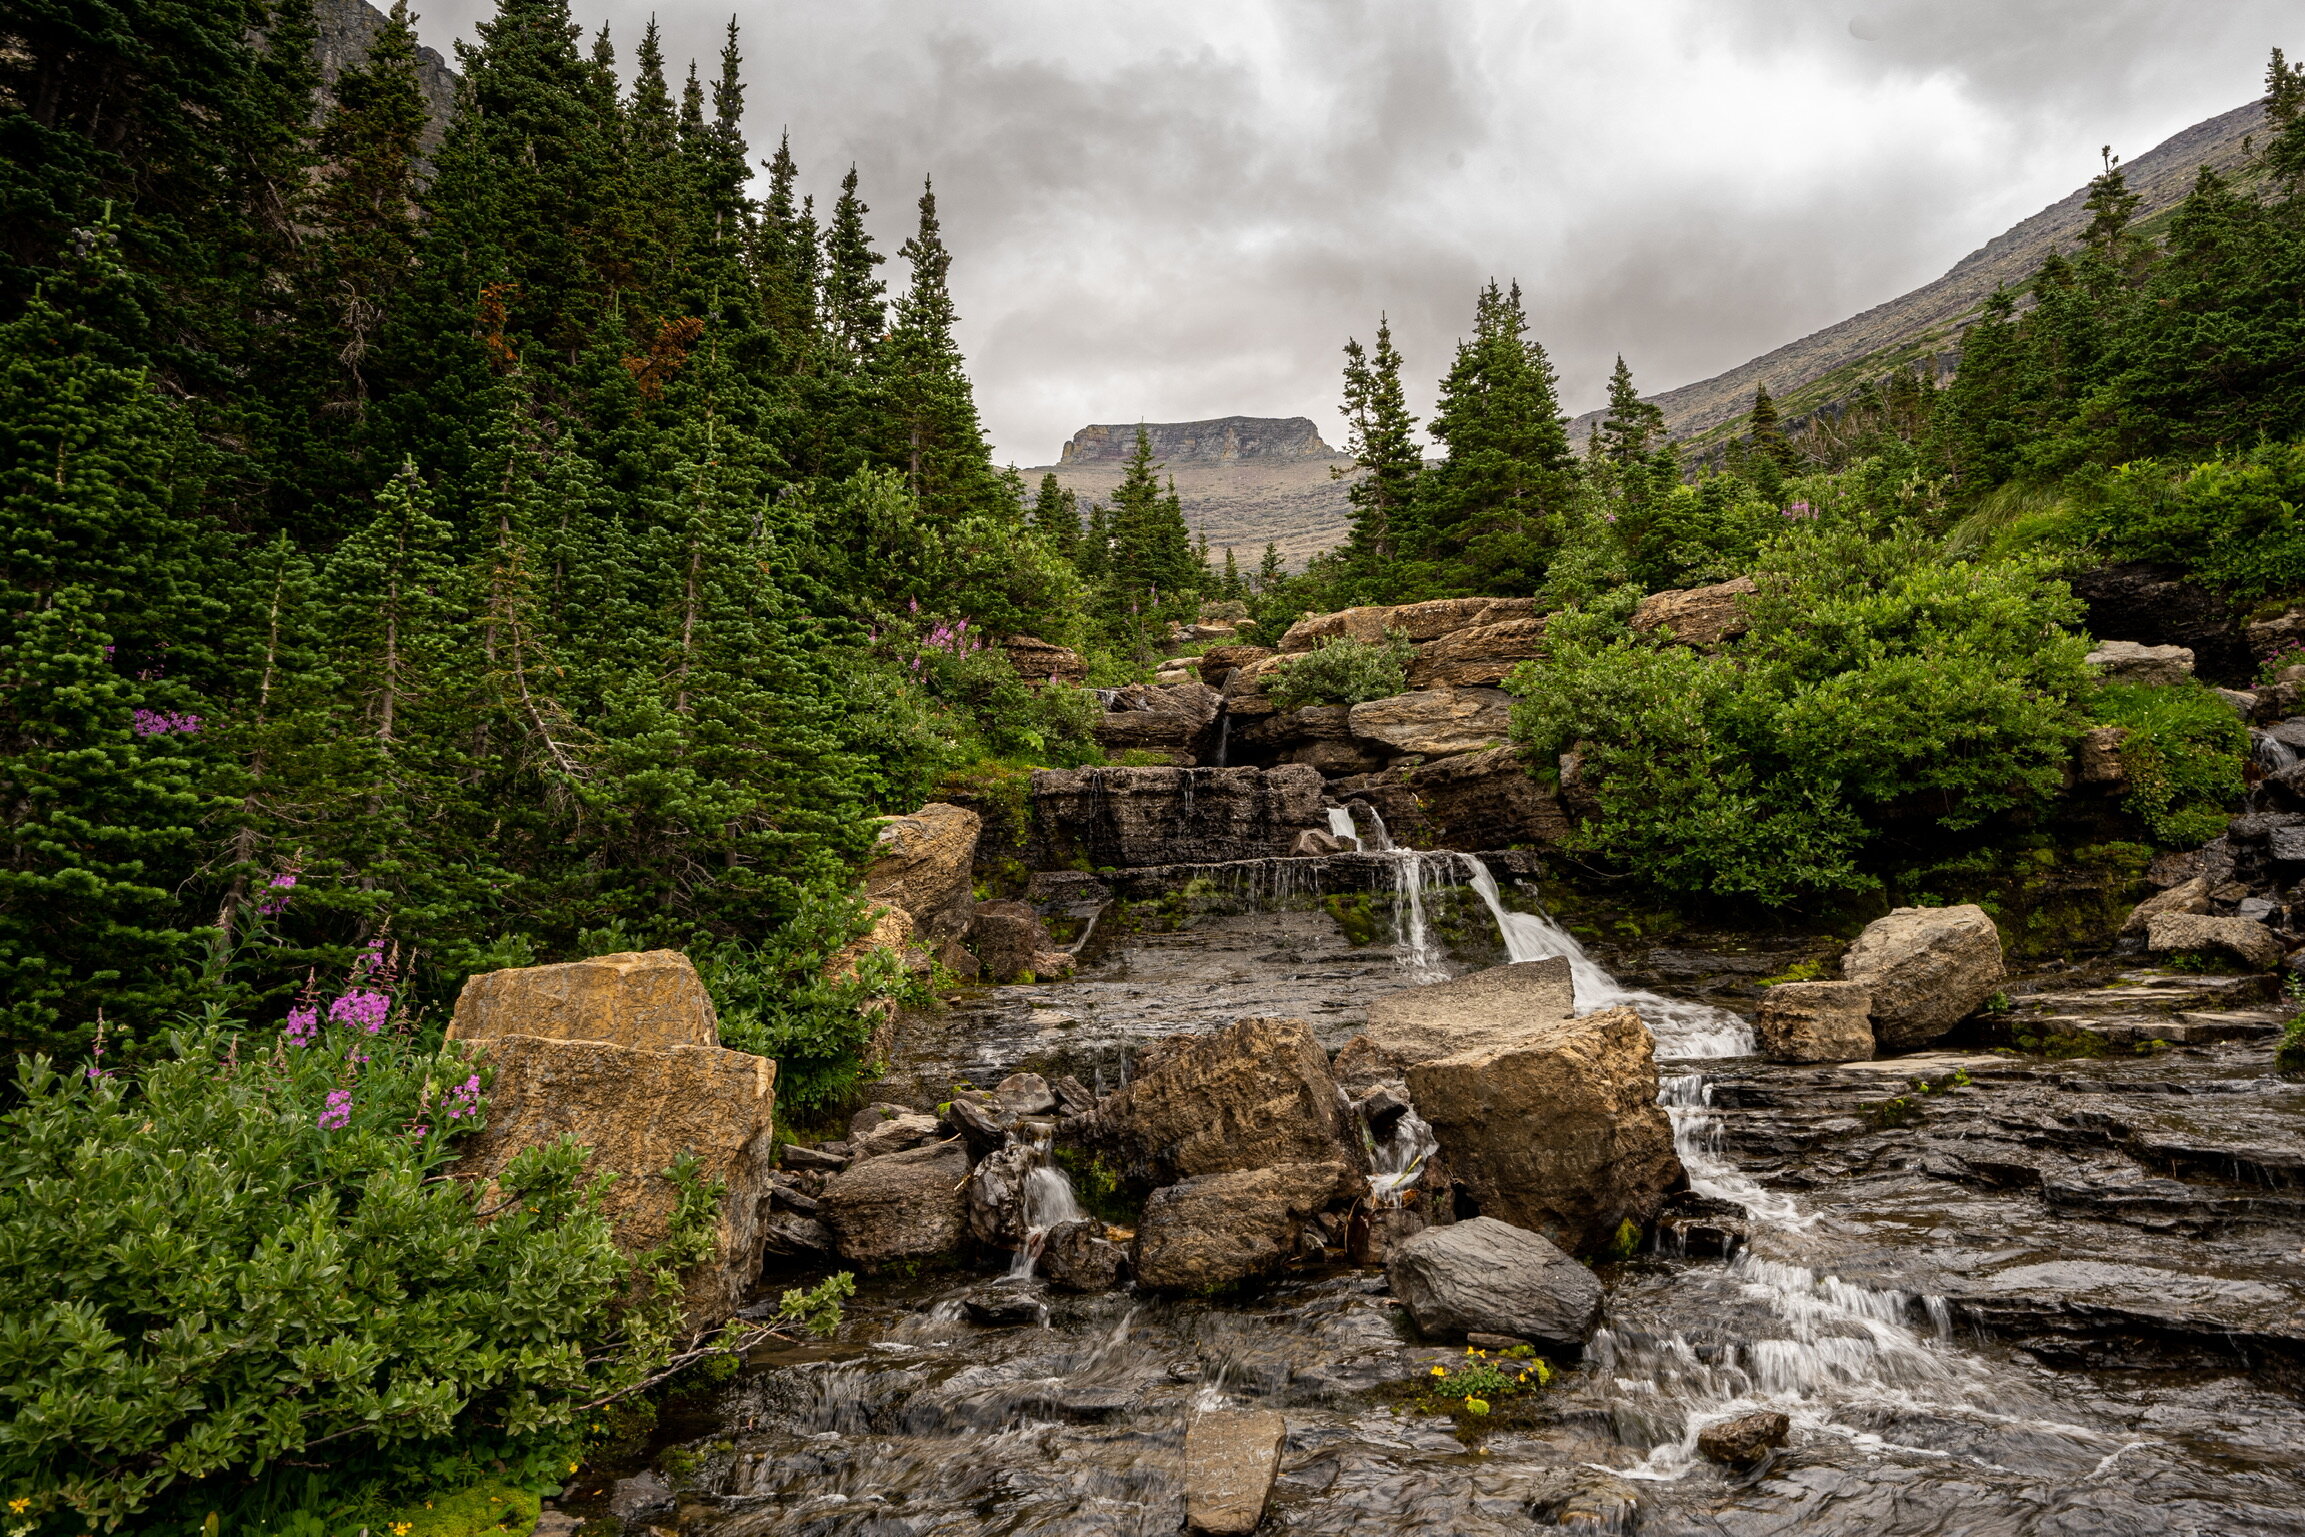  This photo was taken along the  Going-To-The-Sun Road , the 50-mile road that connects the east and west entrances of Glacier Park.  